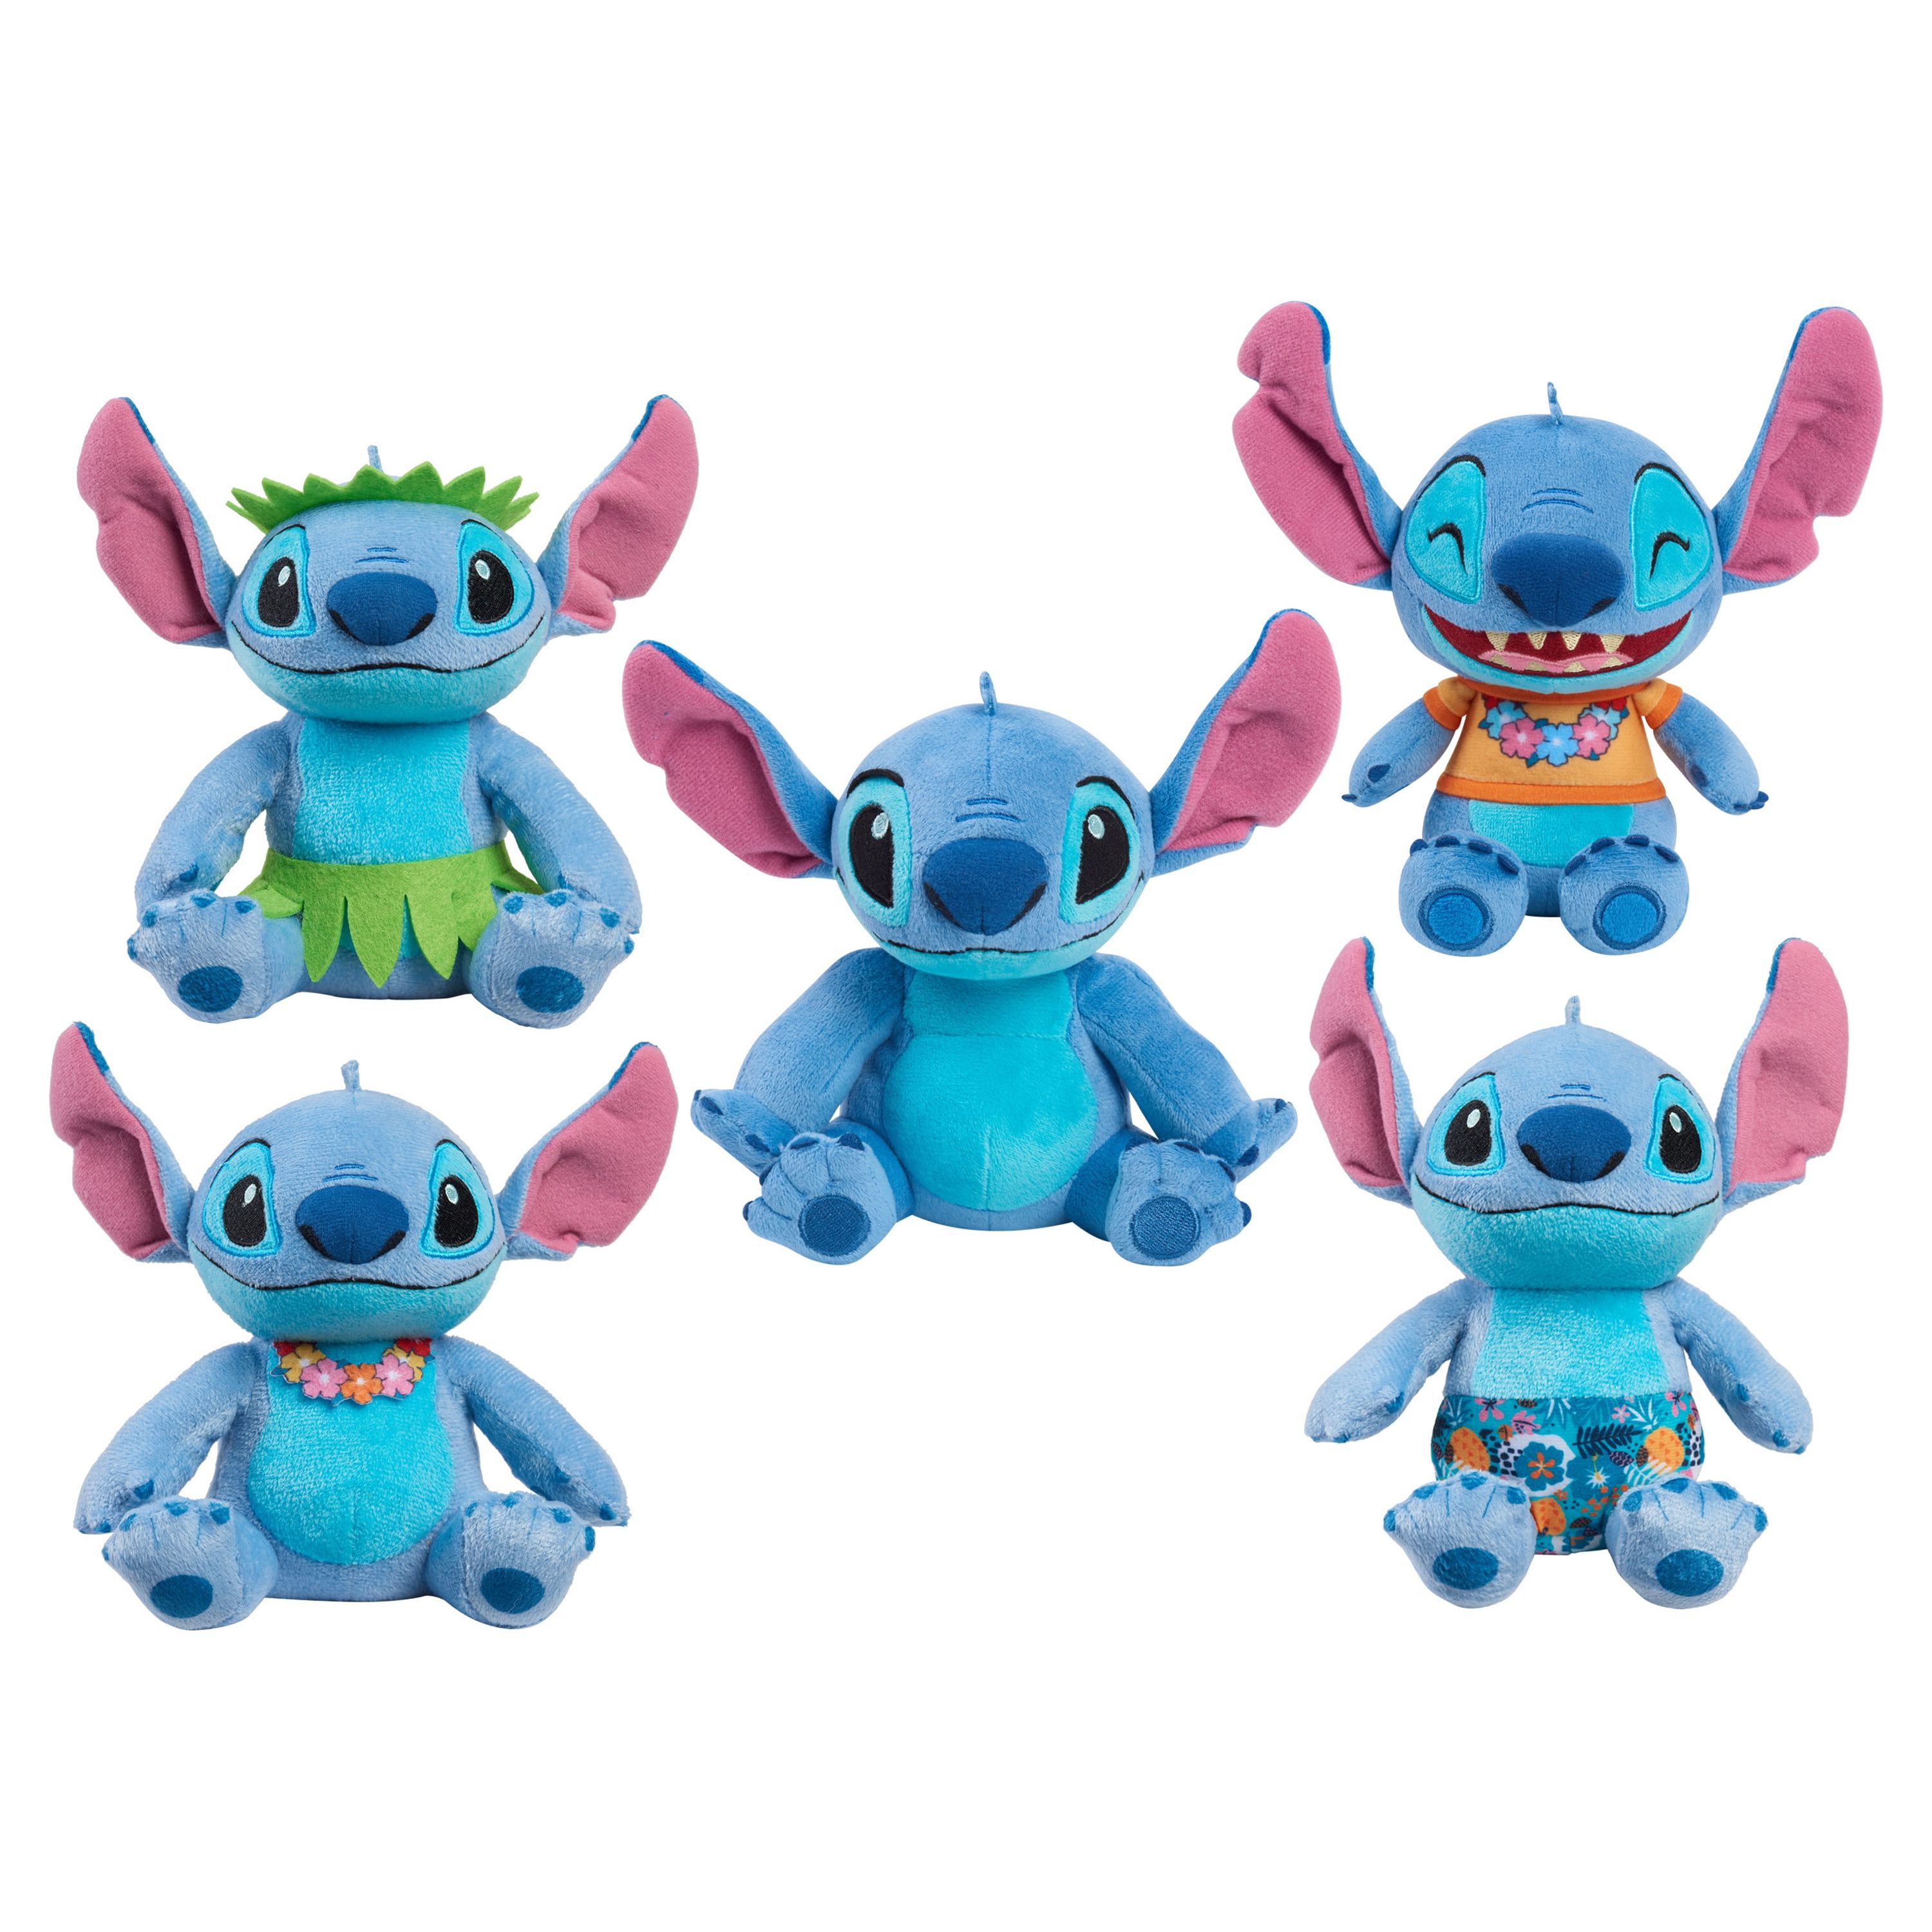 Disney Stitch Plush Collector Set, Officially Licensed Kids Toys for Ages 3 Up, Gifts and Presents - image 4 of 4